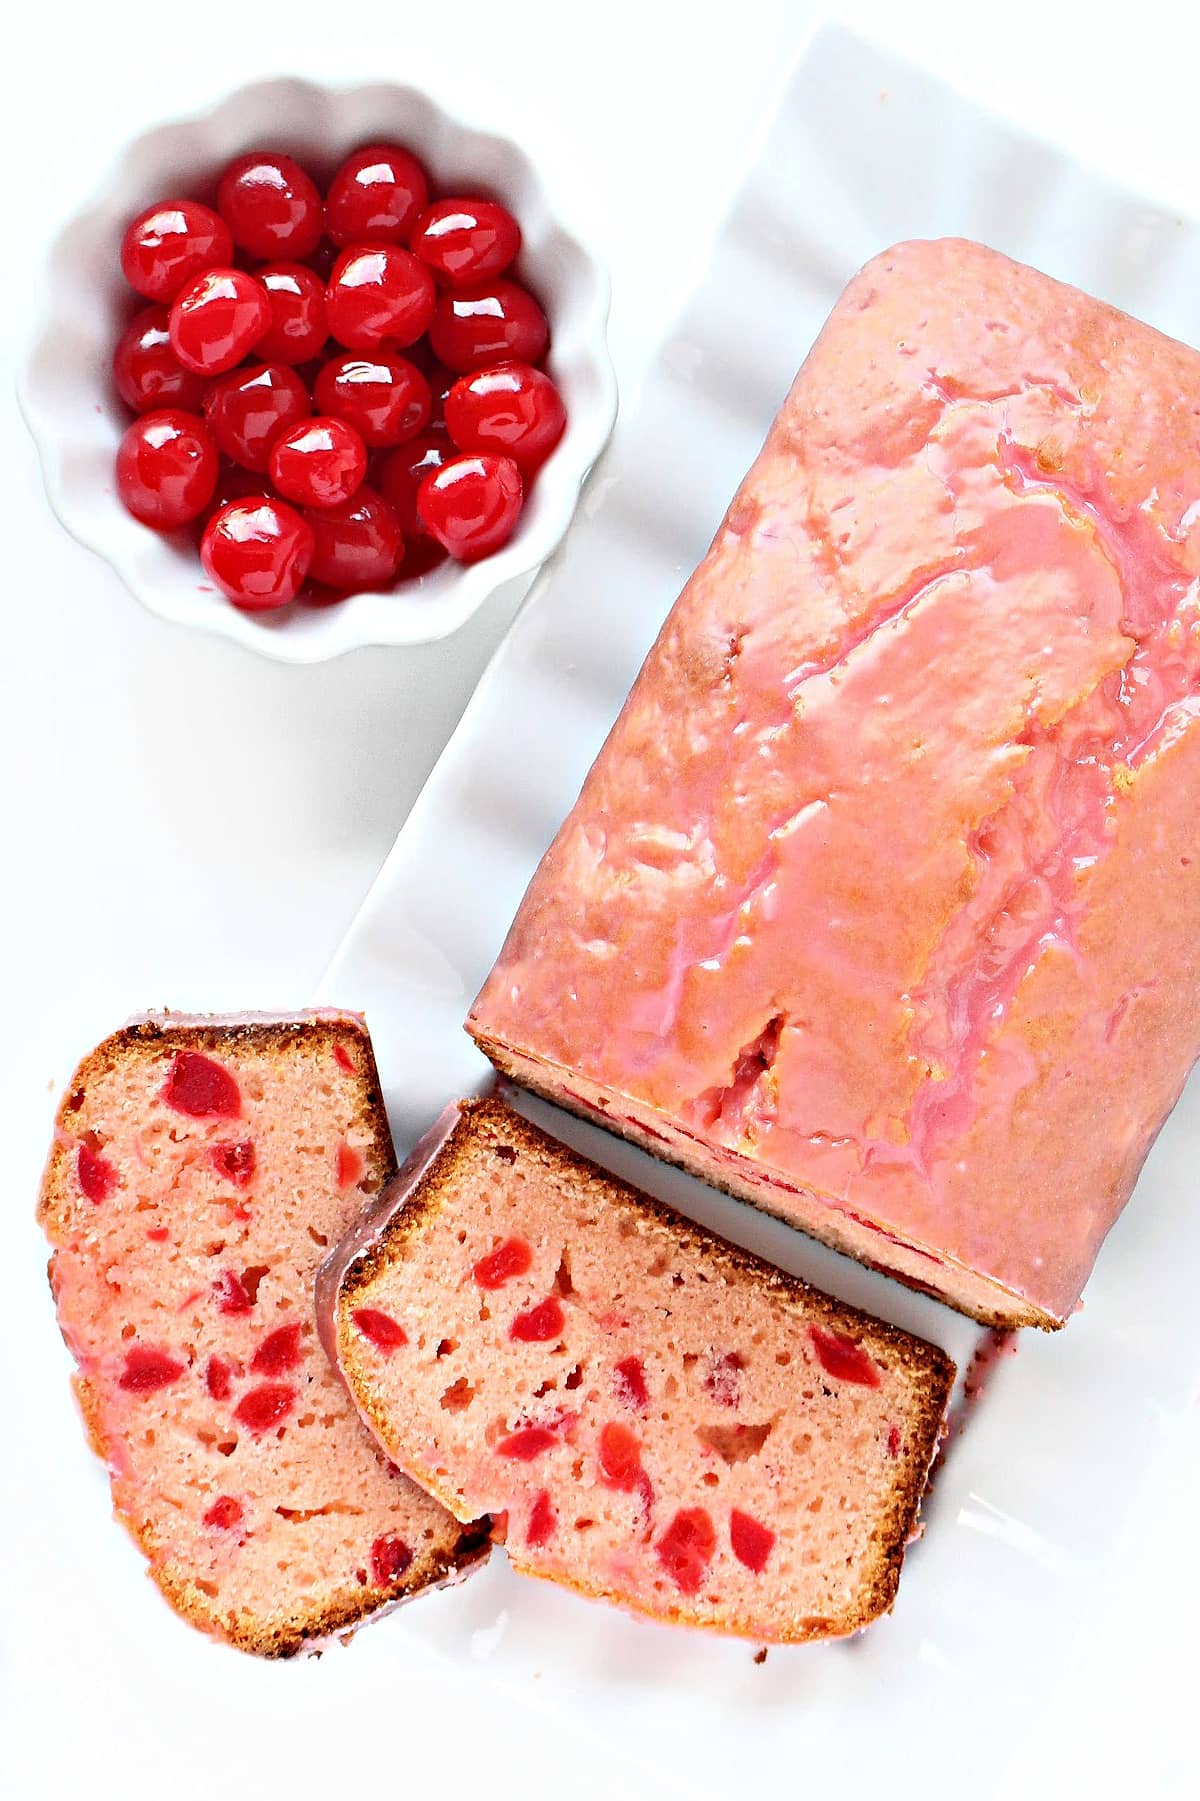 A pink glazed loaf cake and a bowl of maraschino cherries.